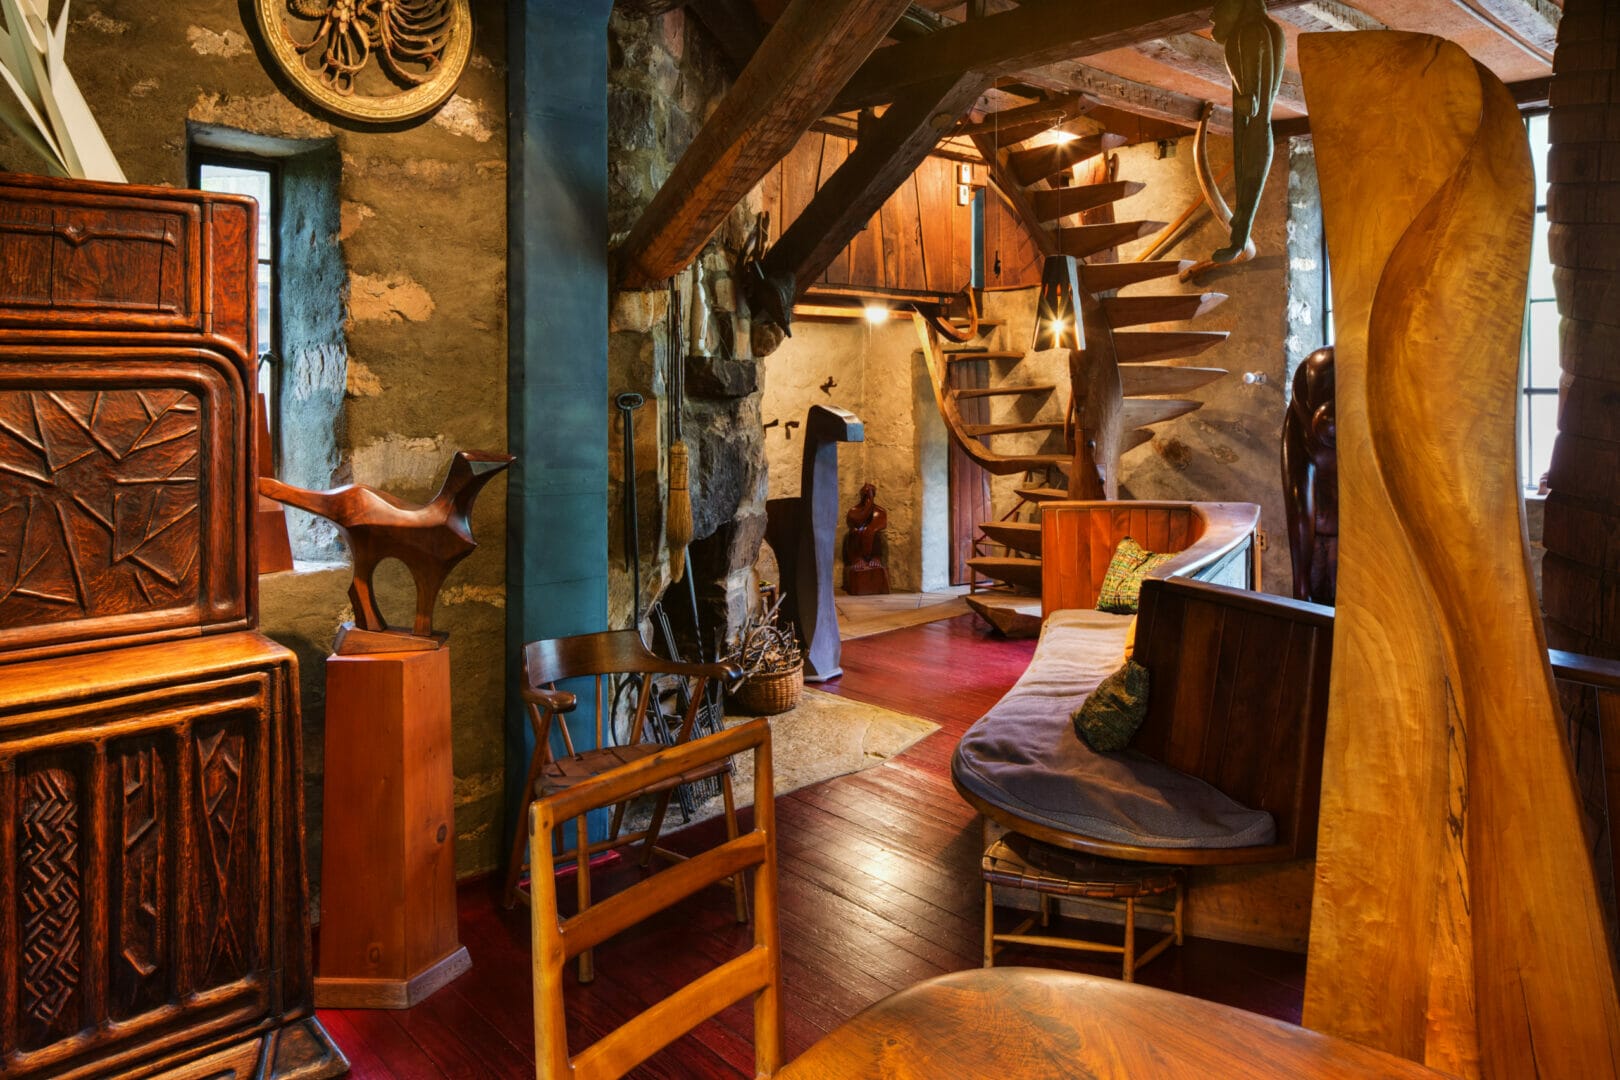 room full of handmade wooden furniture and sculpture, with handmade woden spiral staircase towards the far end of the room.